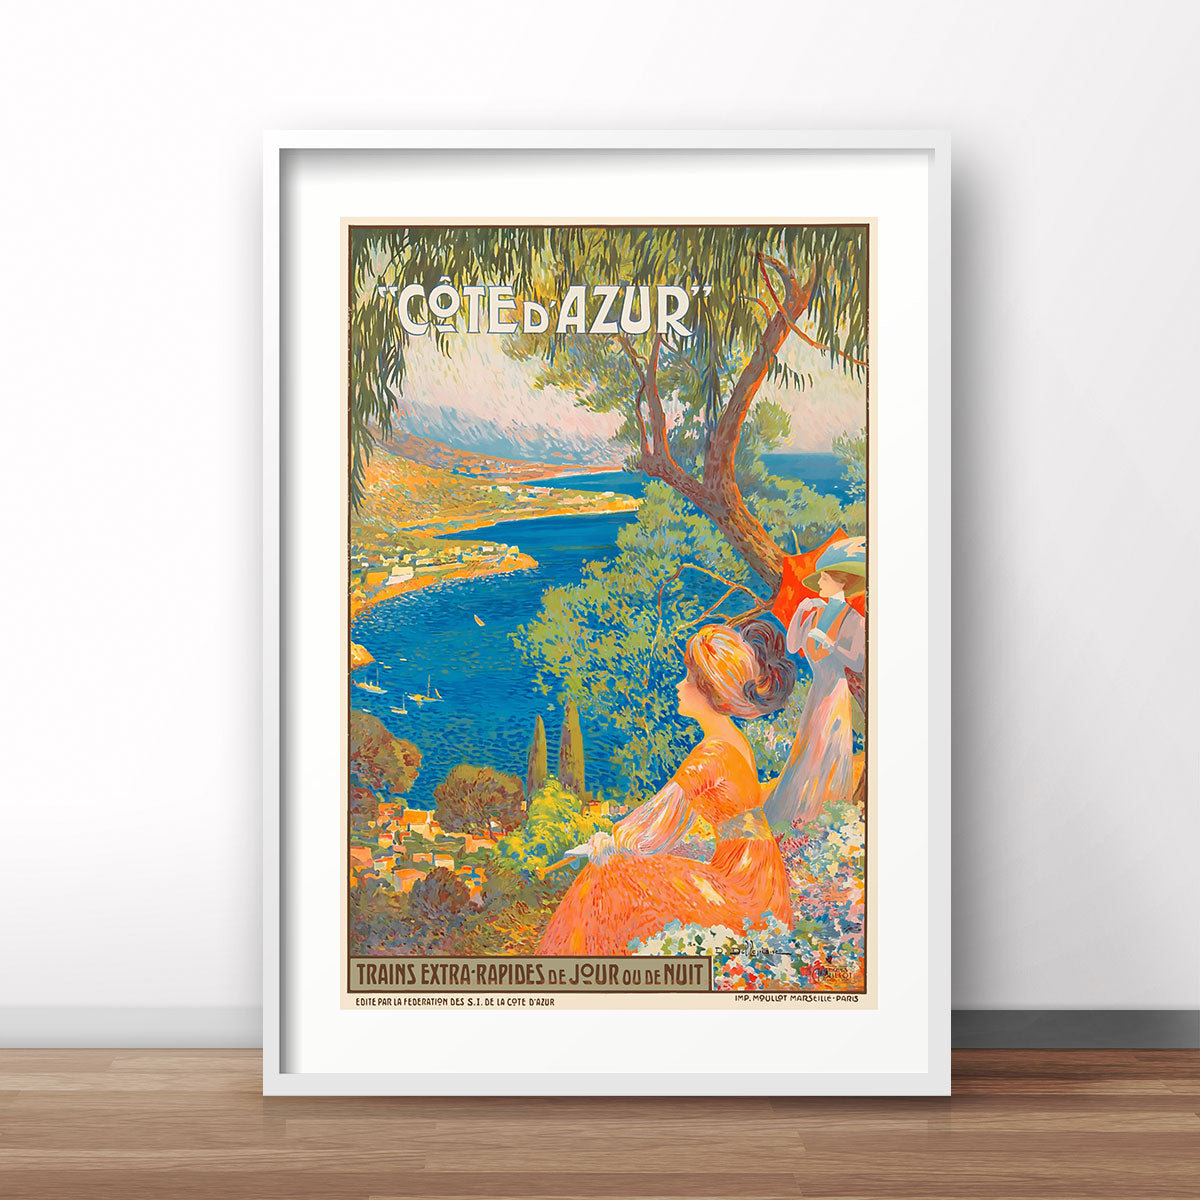 Cote d' Azure vintage retro travel advertising poster print from Places We Luv